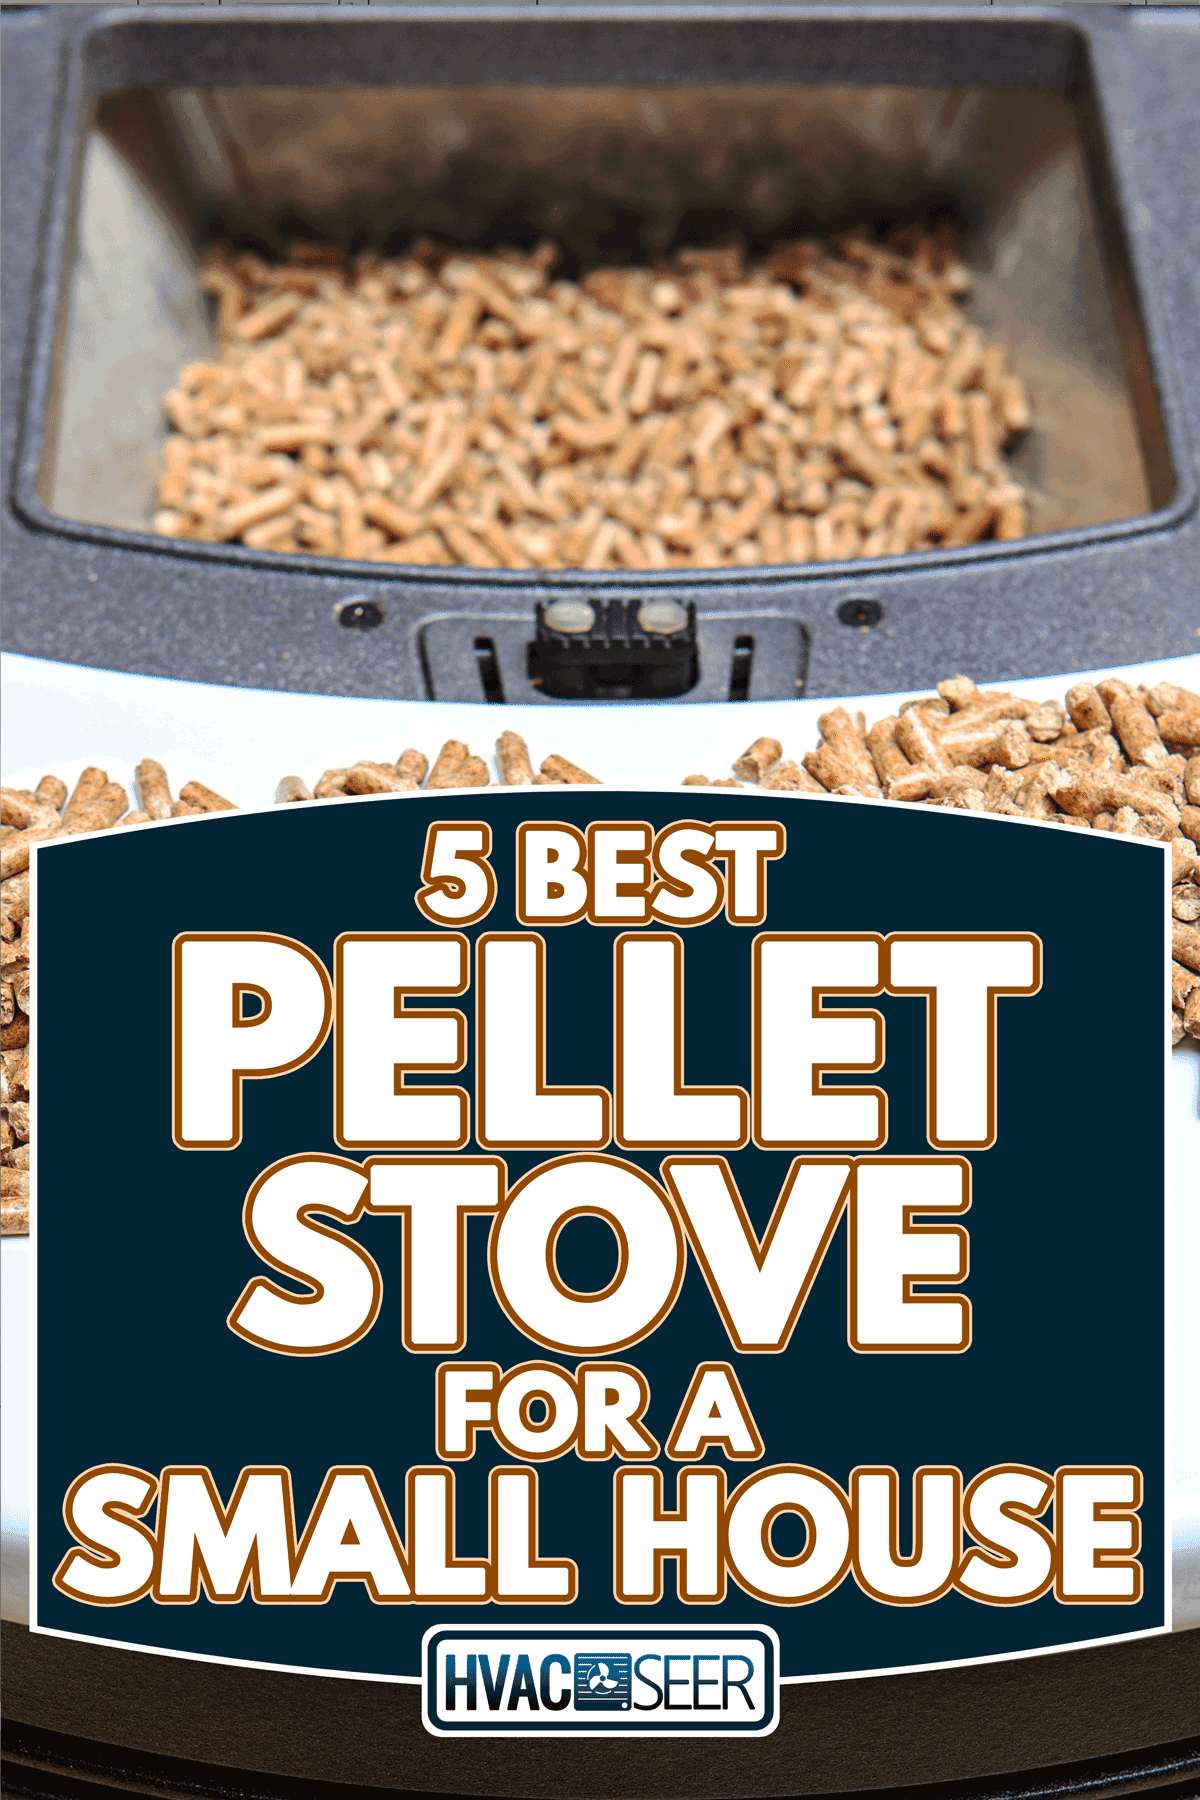 A close up of a heater pellet stove, 5 Best Pellet Stoves For A Small House